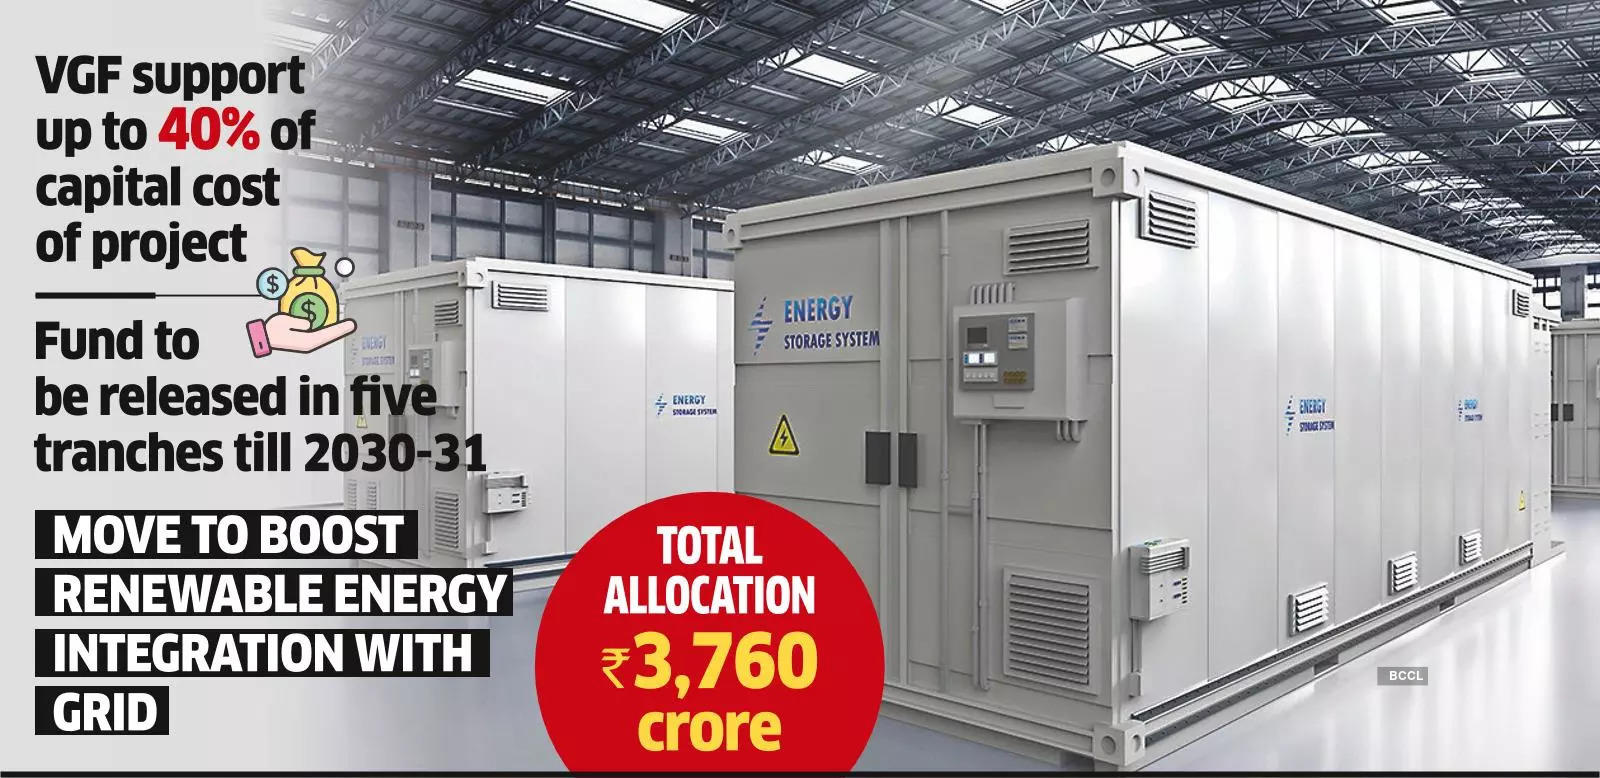 Cabinet Approves Rs 3,760 Crore Viability Gap Funding Scheme for 4 GW Battery Storage by 2030-31_60.1